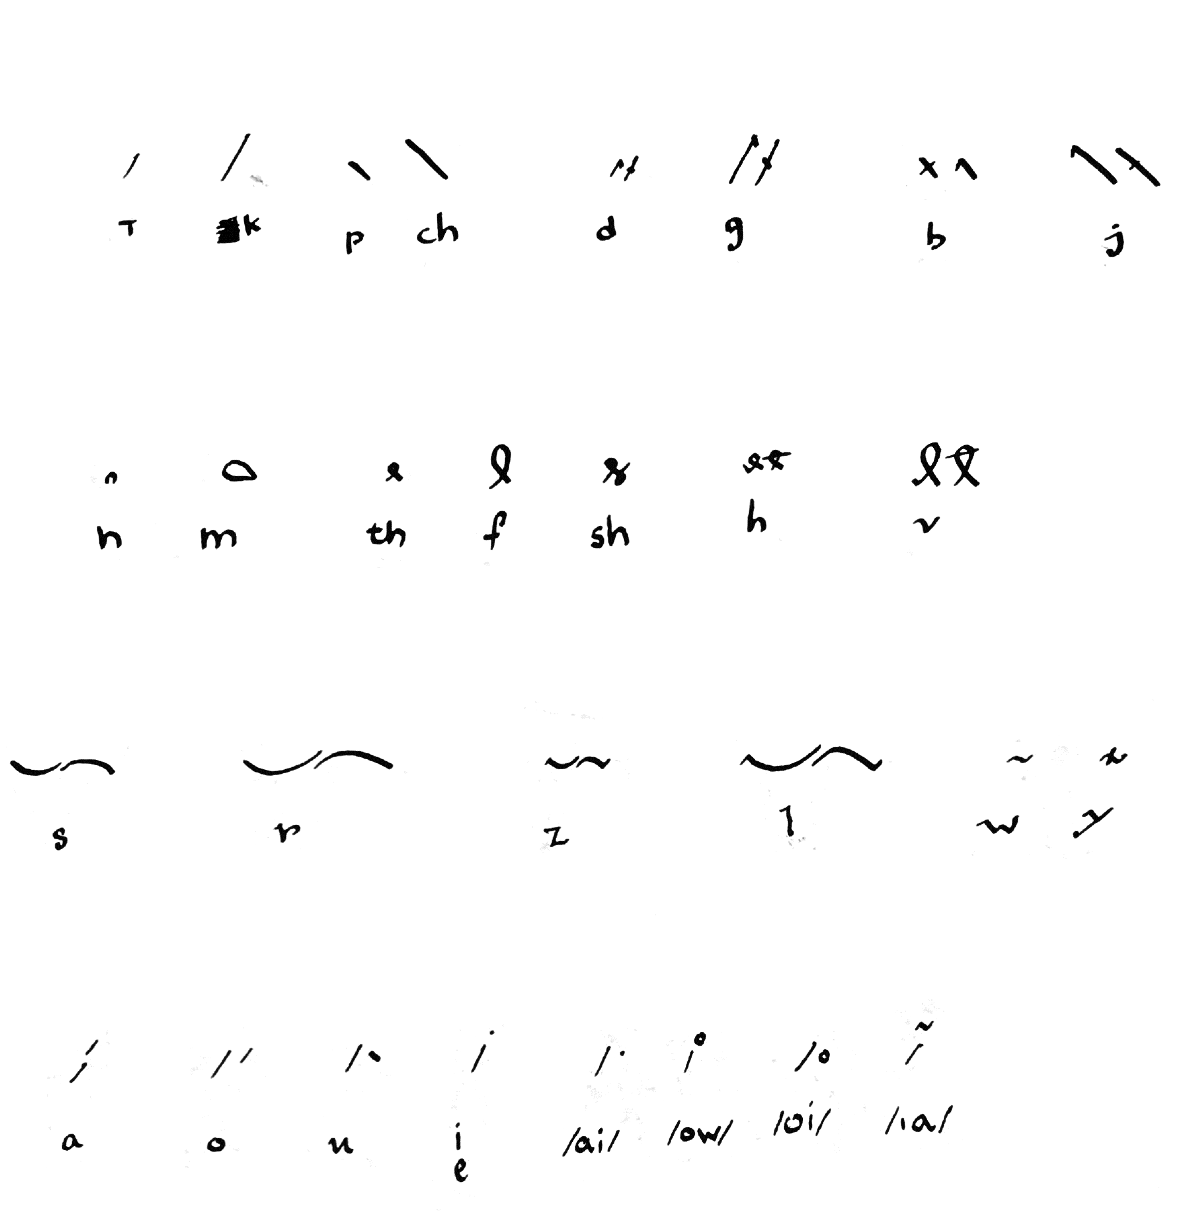 Basic Inventory of a New Shorthand System